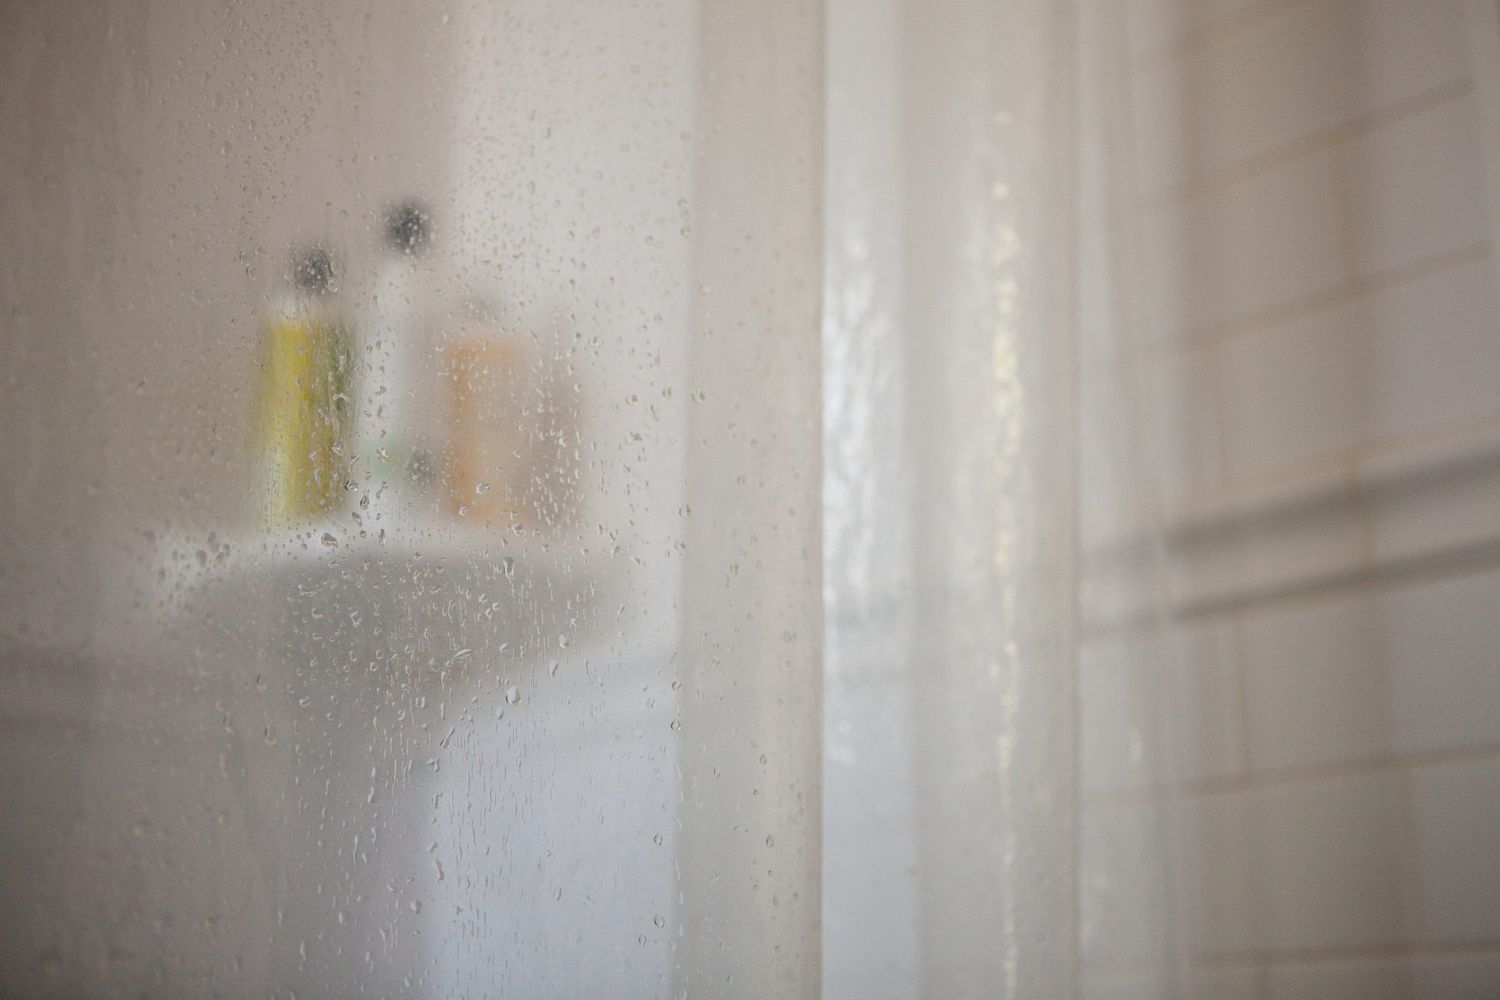 Shower Curtain Liner Cleaning Tips, How Do You Clean A Clear Shower Curtain Liner